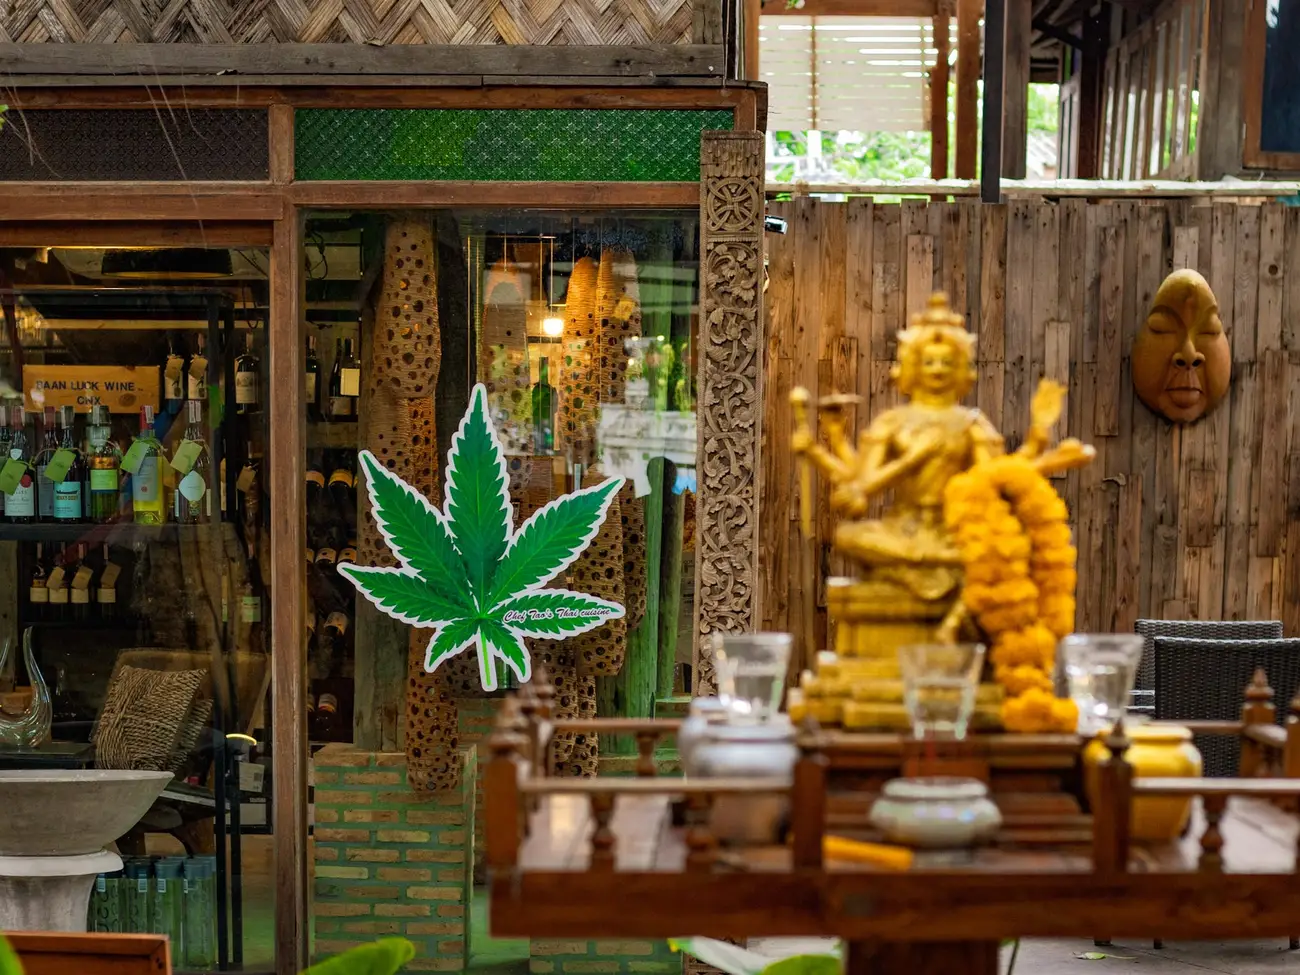 Riding high and building businesses on the legalization of marijuana in Thailand